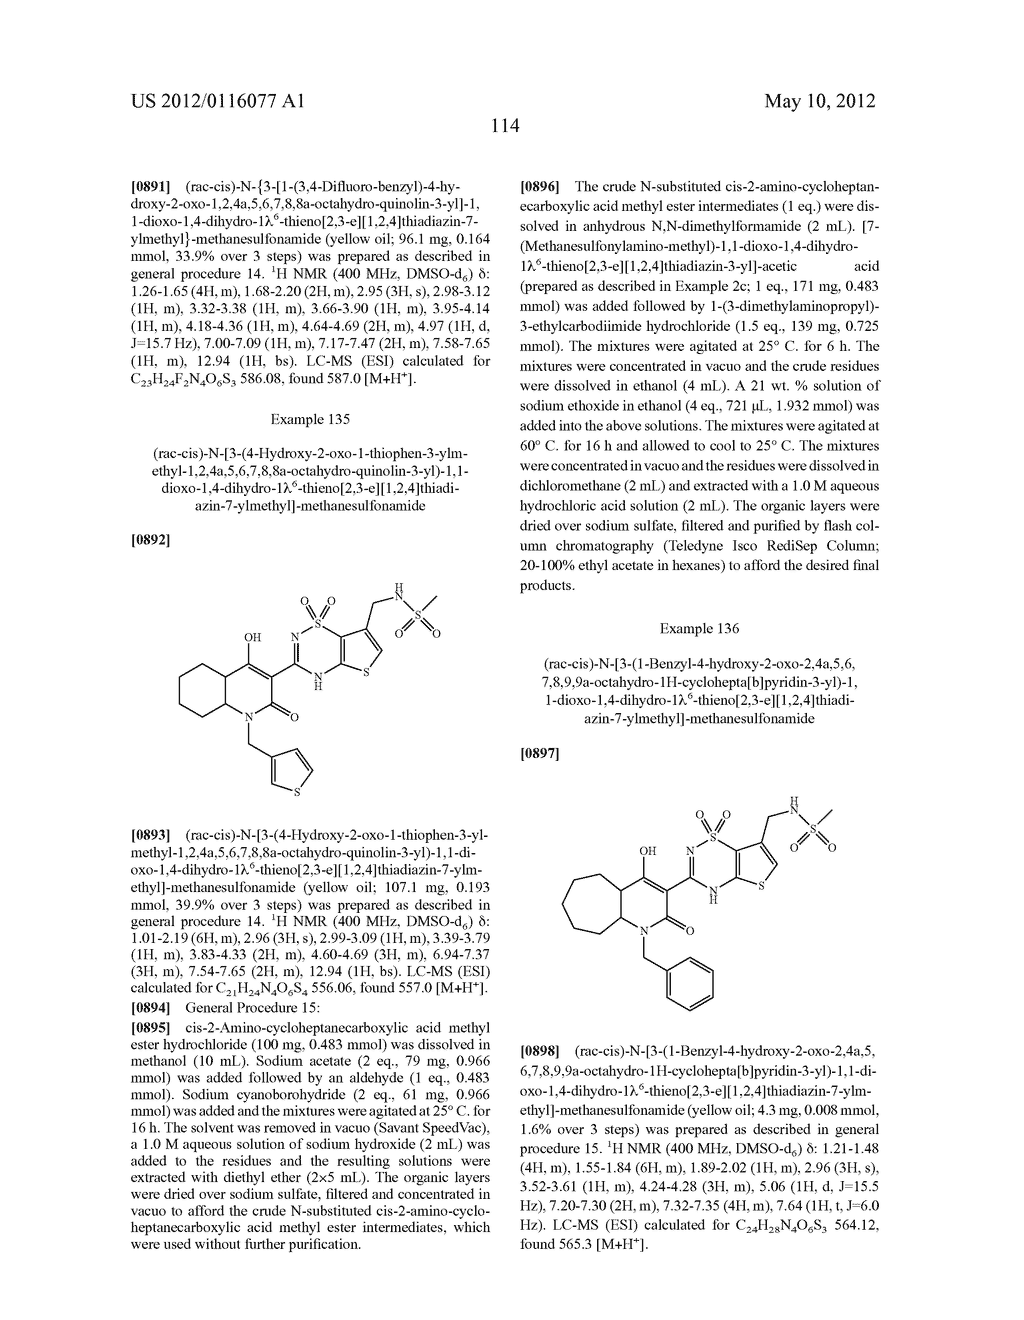 [1,2,4]THIADIAZIN-3-YL ACETIC ACID COMPOUND[[S]] AND METHODS OF MAKING THE     ACETIC ACID COMPOUND - diagram, schematic, and image 115